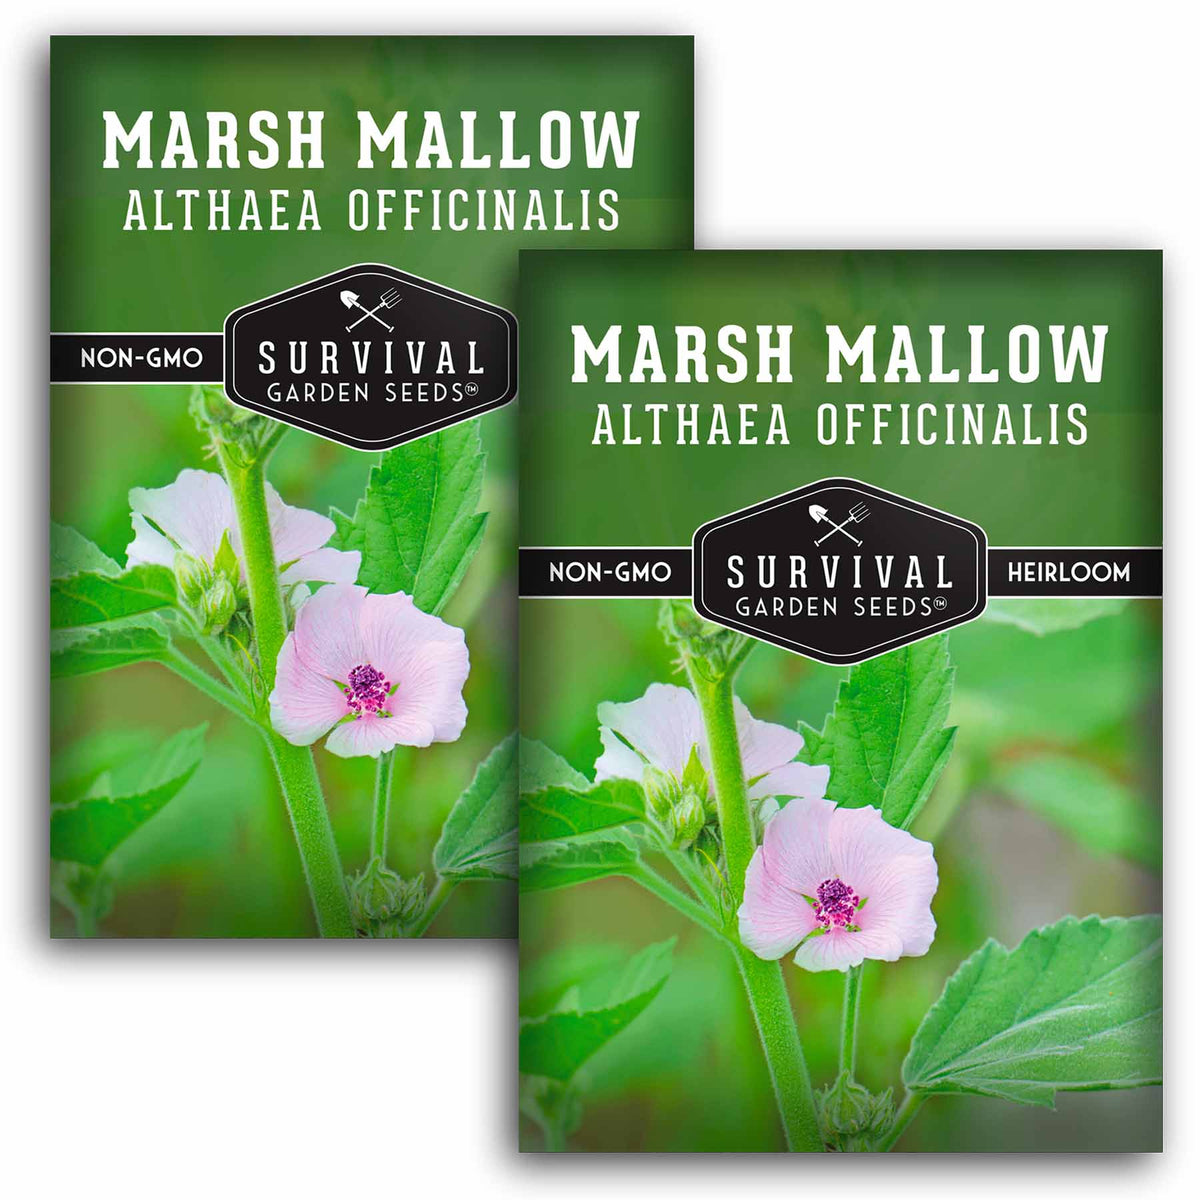 2 packets of Marsh Mallow seeds